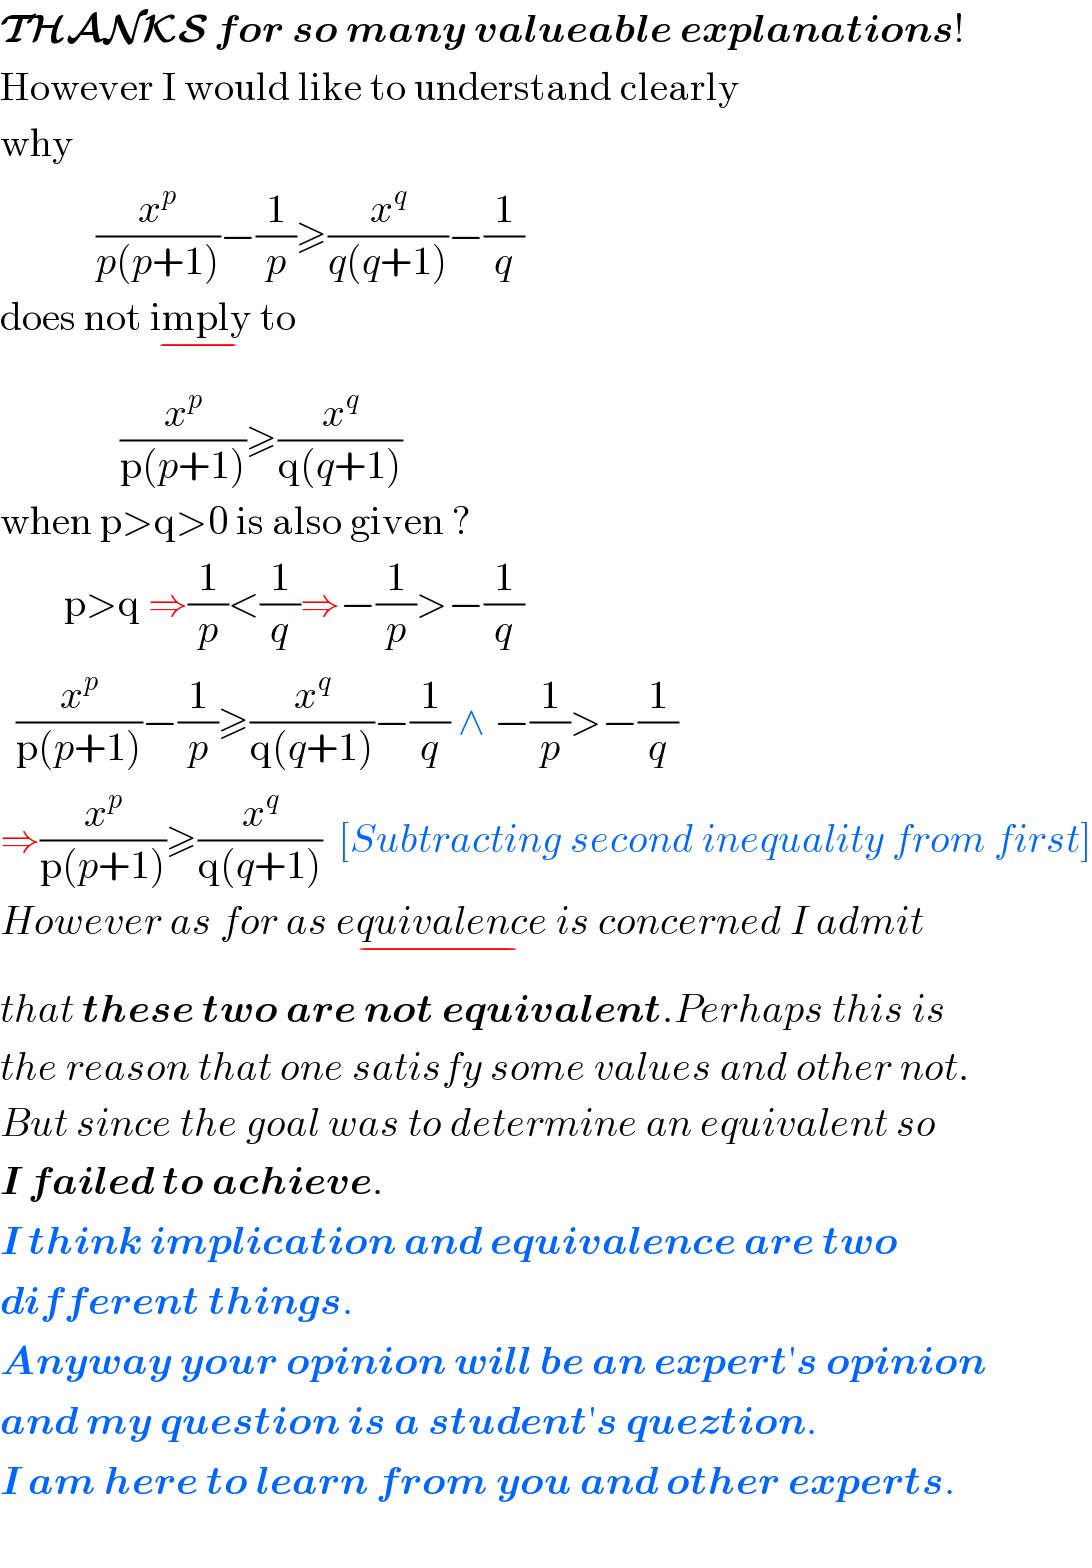 THANKS for so many valueable explanations!  However I would like to understand clearly  why              (x^p /(p(p+1)))−(1/p)≥(x^q /(q(q+1)))−(1/q)  does not imply_(−)  to                 (x^p /(p(p+1)))≥(x^q /(q(q+1)))      when p>q>0 is also given ?          p>q ⇒(1/p)<(1/q)⇒−(1/p)>−(1/q)    (x^p /(p(p+1)))−(1/p)≥(x^q /(q(q+1)))−(1/q) ∧ −(1/p)>−(1/q)  ⇒(x^p /(p(p+1)))≥(x^q /(q(q+1)))  [Subtracting second inequality from first]  However as for as equivalence_(−)  is concerned I admit  that these two are not equivalent.Perhaps this is  the reason that one satisfy some values and other not.  But since the goal was to determine an equivalent so  I failed to achieve.  I think implication and equivalence are two  different things.  Anyway your opinion will be an expert′s opinion   and my question is a student′s queztion.  I am here to learn from you and other experts.    